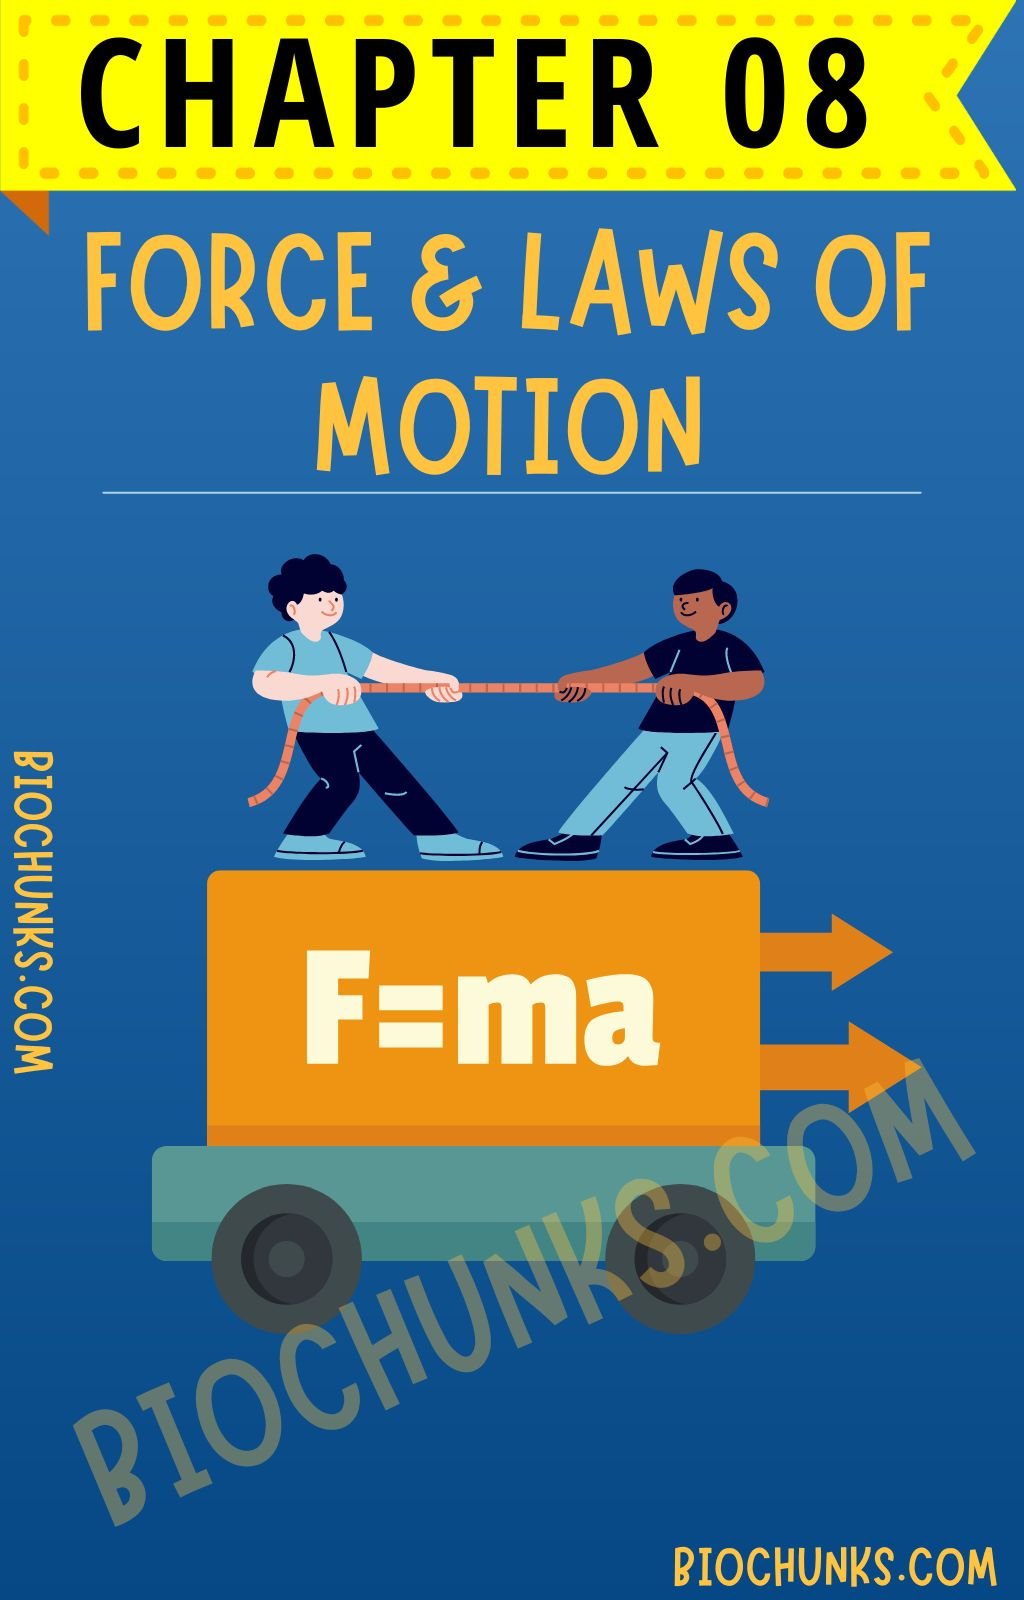 Force & Laws of Motion Chapter 08 Class 9th biochunks.com